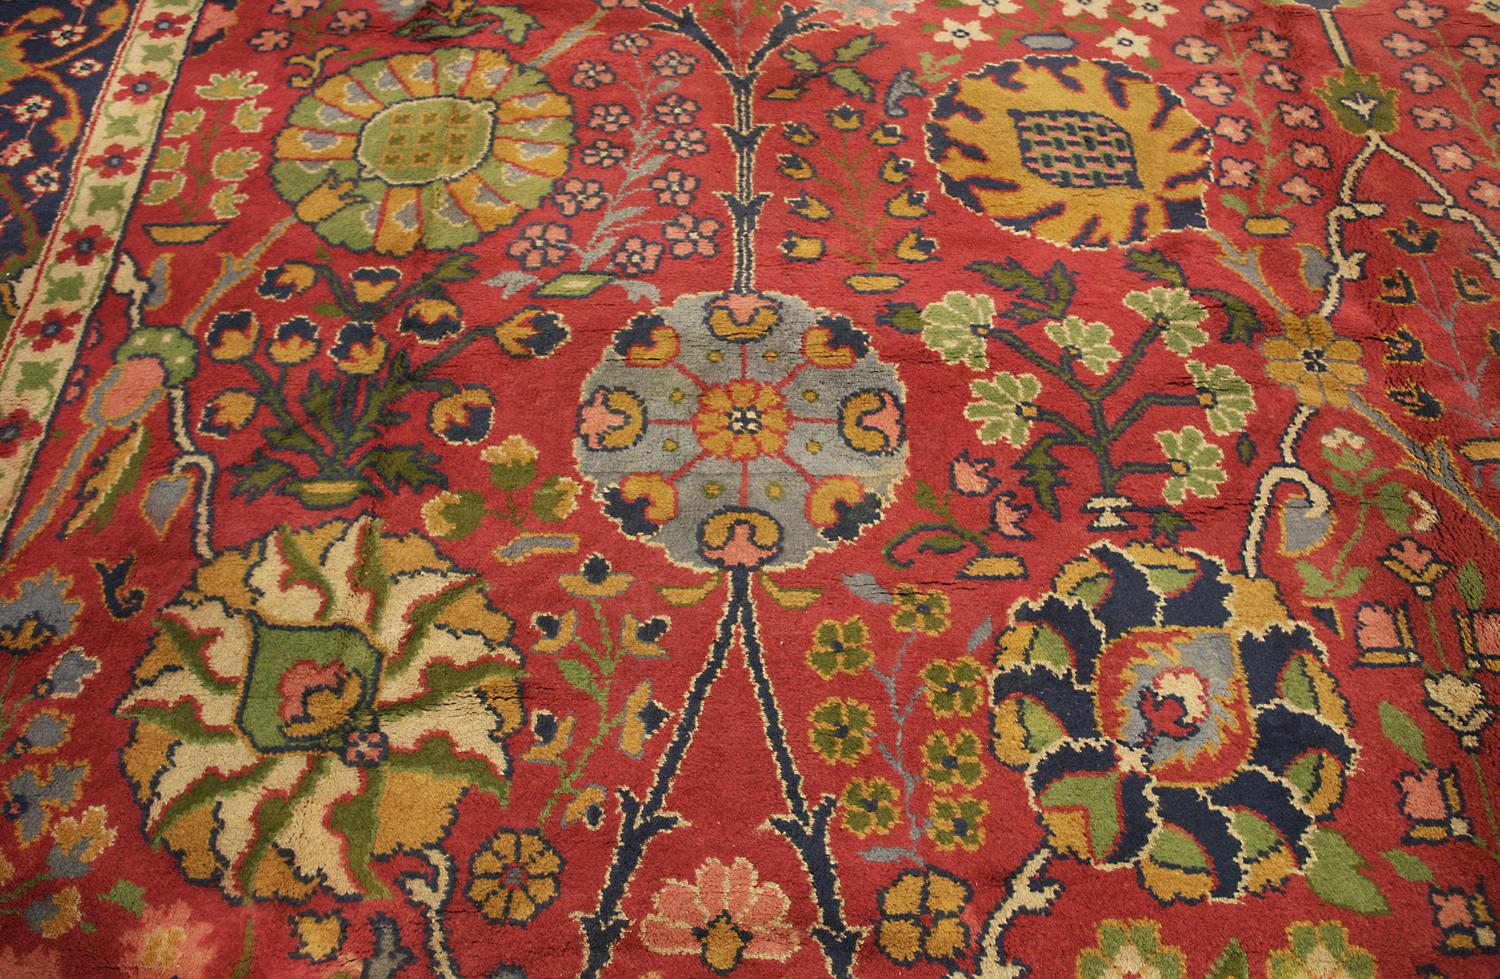 Circa 1920 Oversized Antique English Wool Donegal Carpet, Red Field For Sale 3